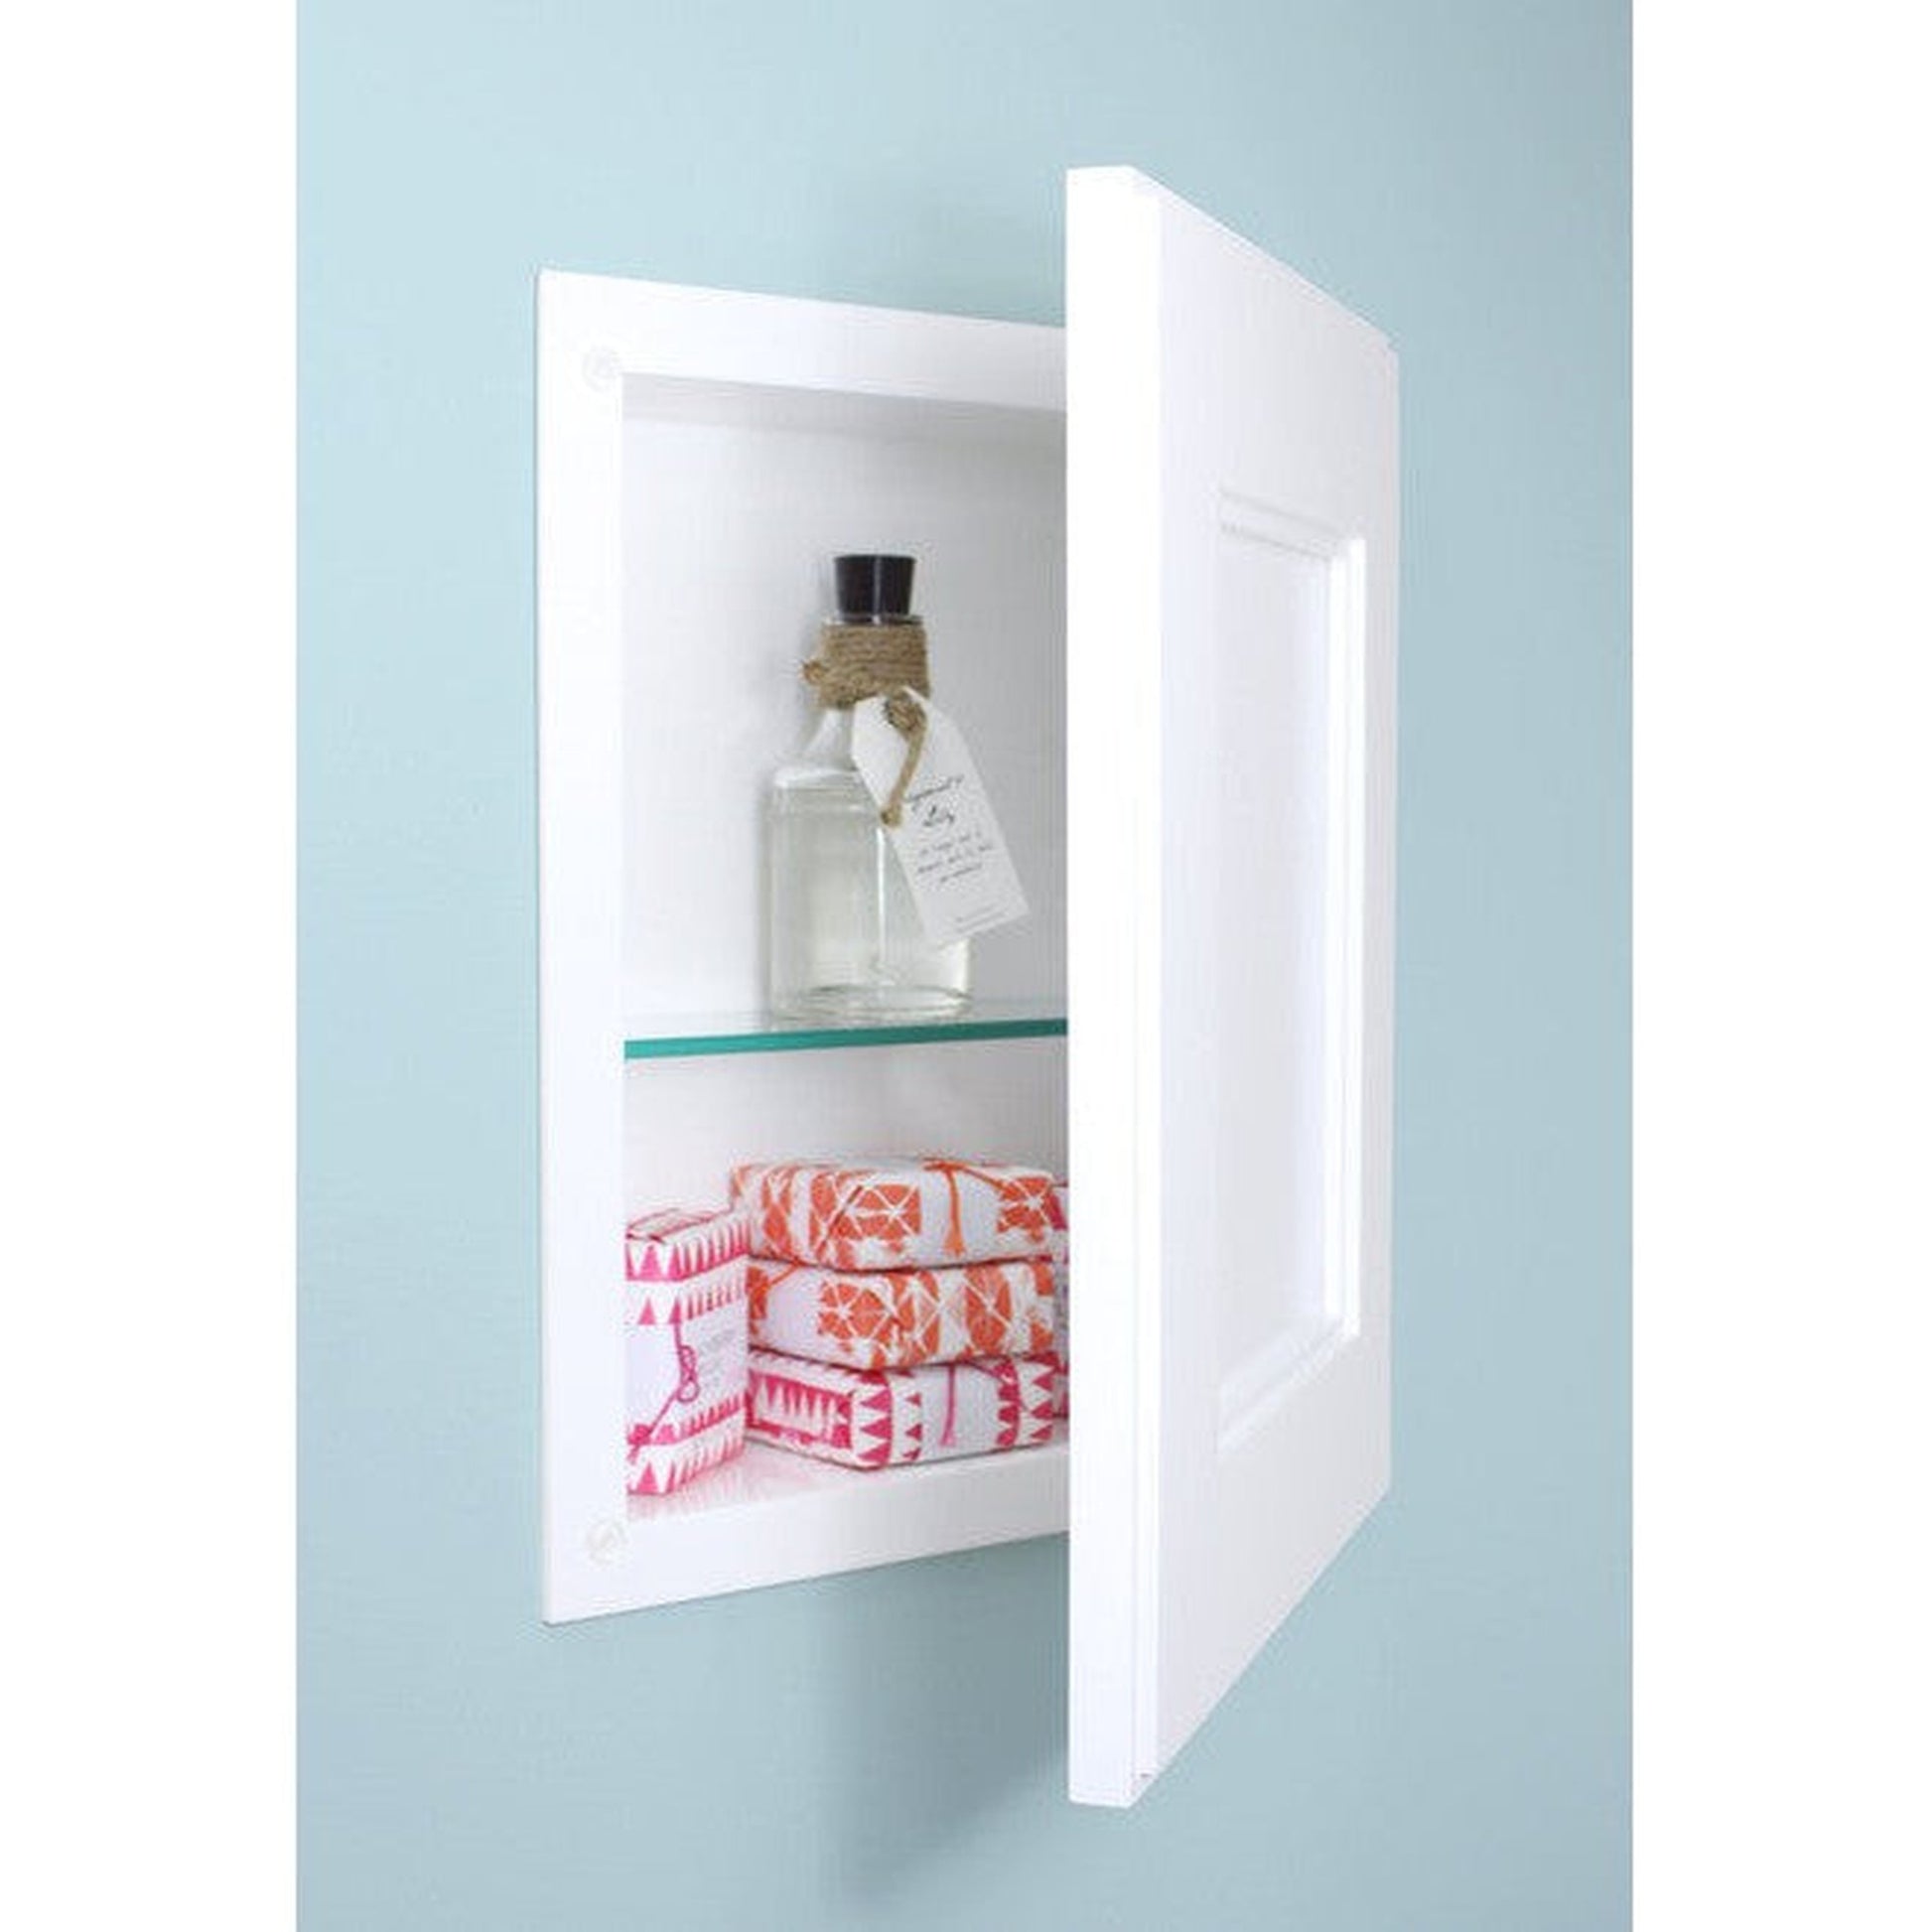 Fox Hollow Furnishings 11" x 14" White Compact Portrait Shaker Style Standard 4" Depth Recessed Medicine Cabinet With Mirror